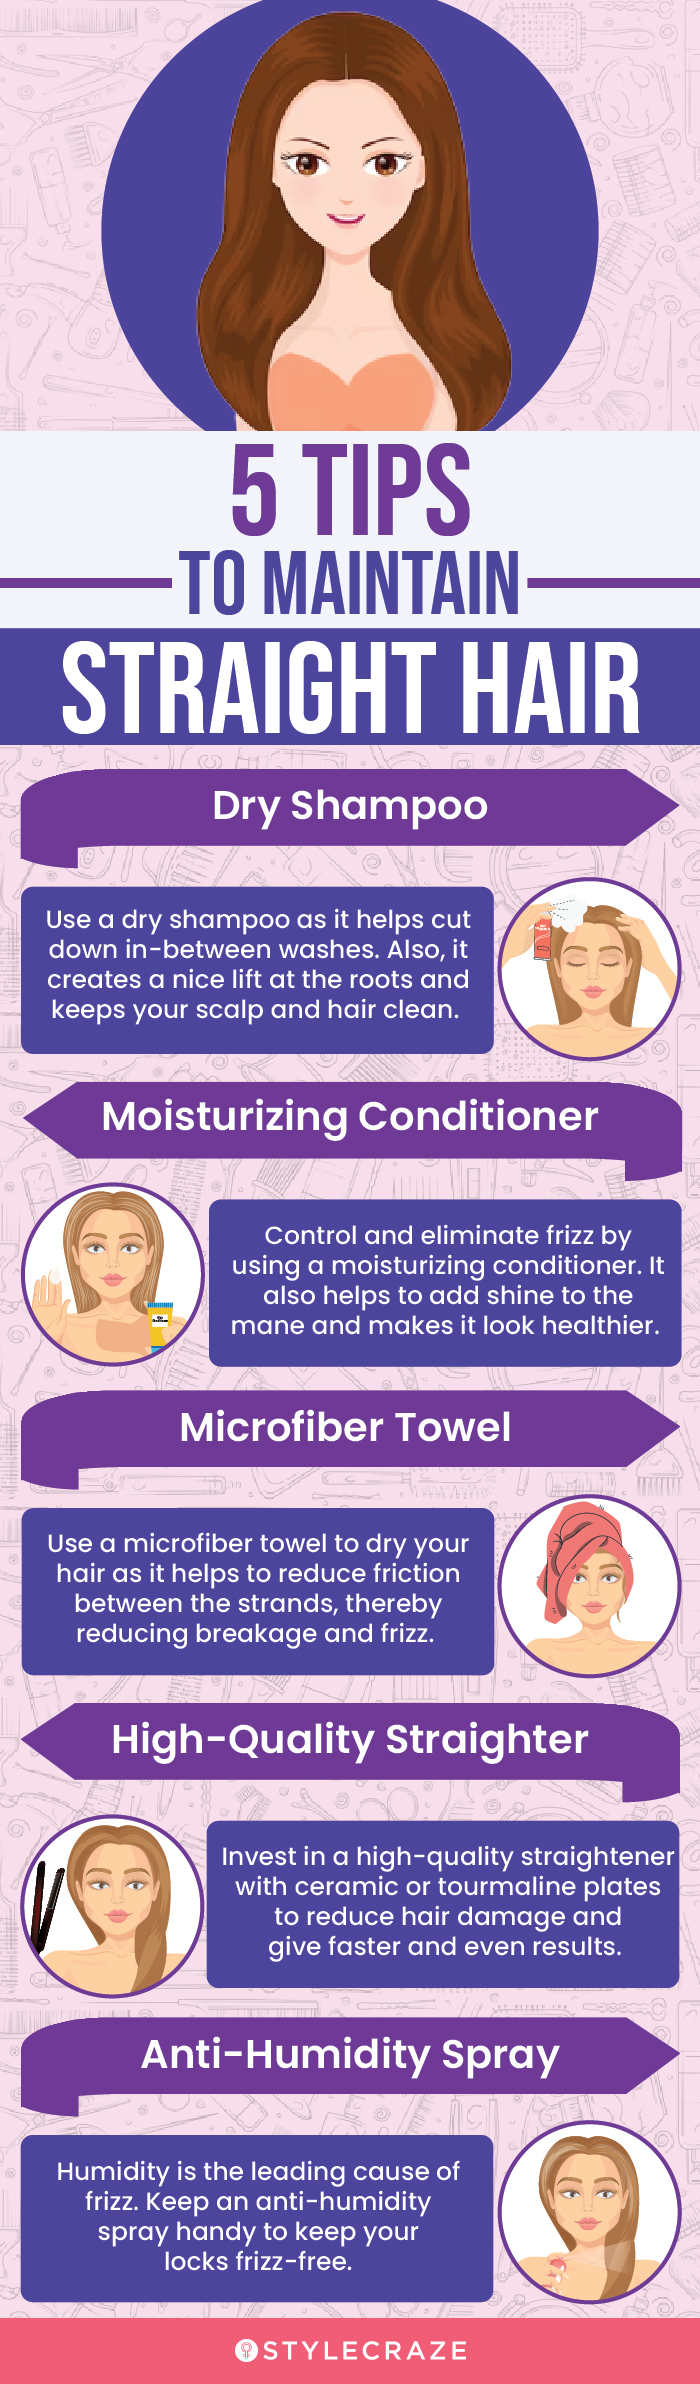 5 tips to maintain straight hair (infographic)